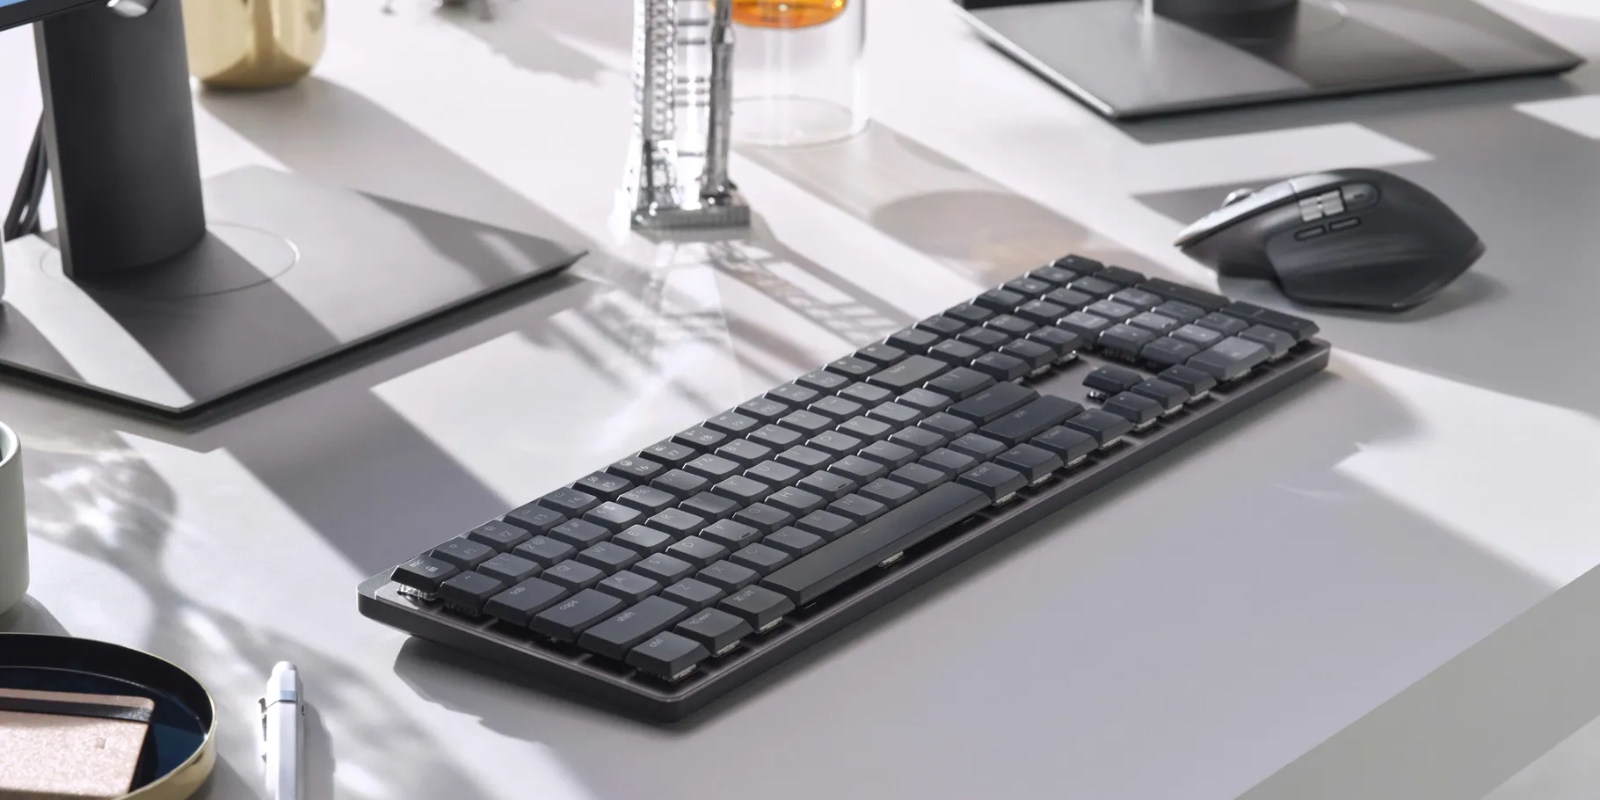 Logitech Widens the Master Series With MX Mechanical Keyboards And MX Master 3S Mouse